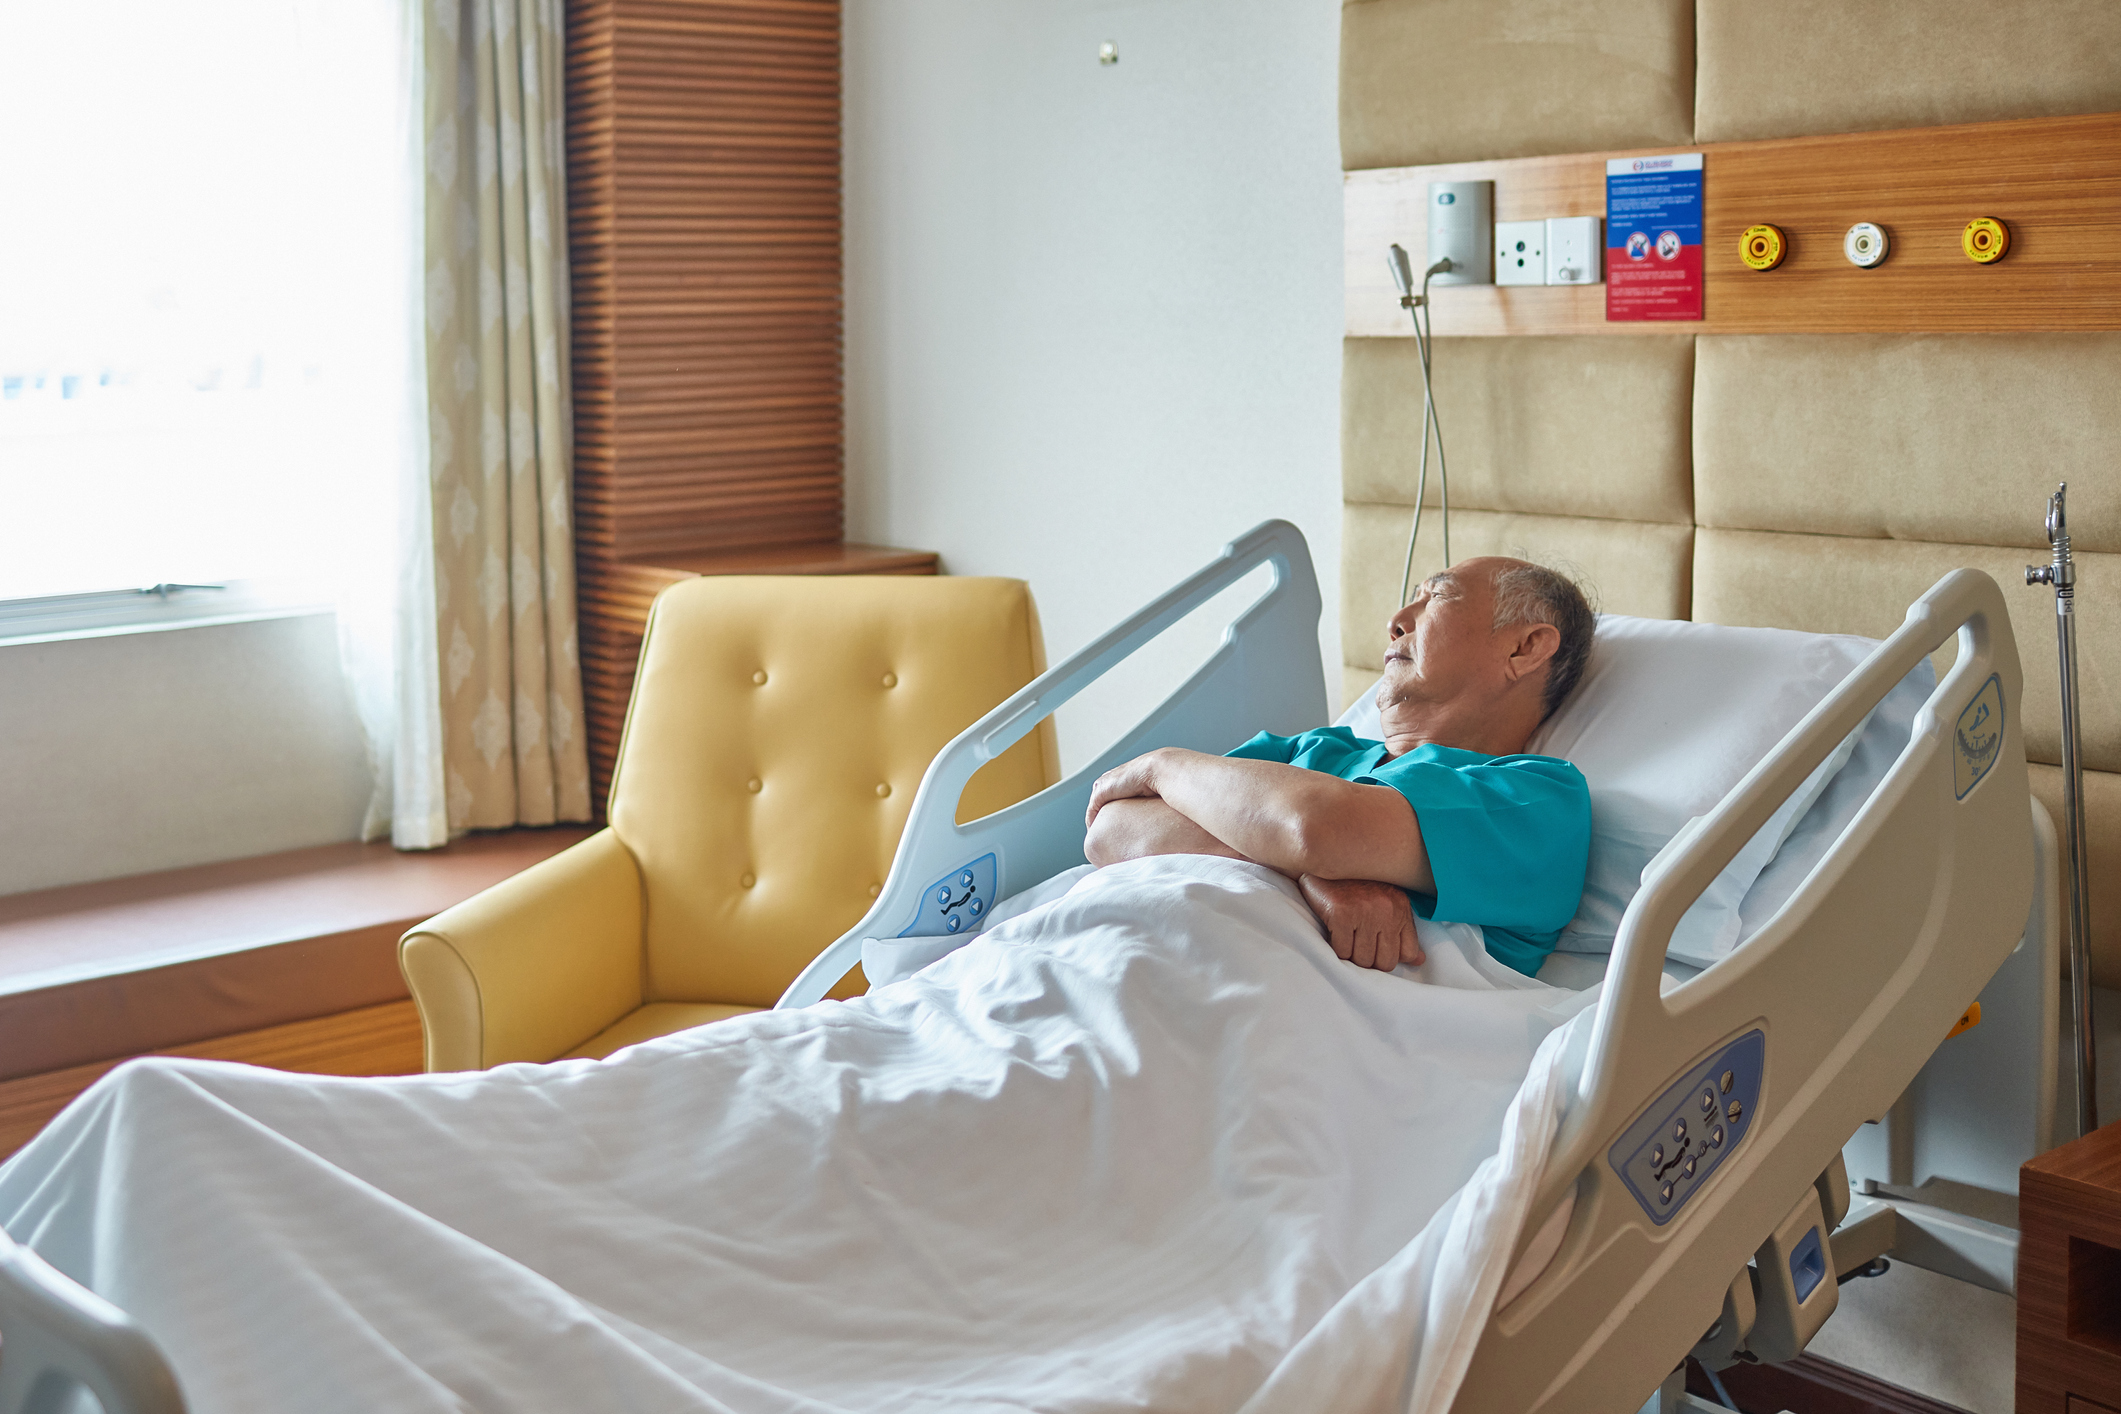 Researchers are working to better understand the causes of delirium in hospitalized older adults.